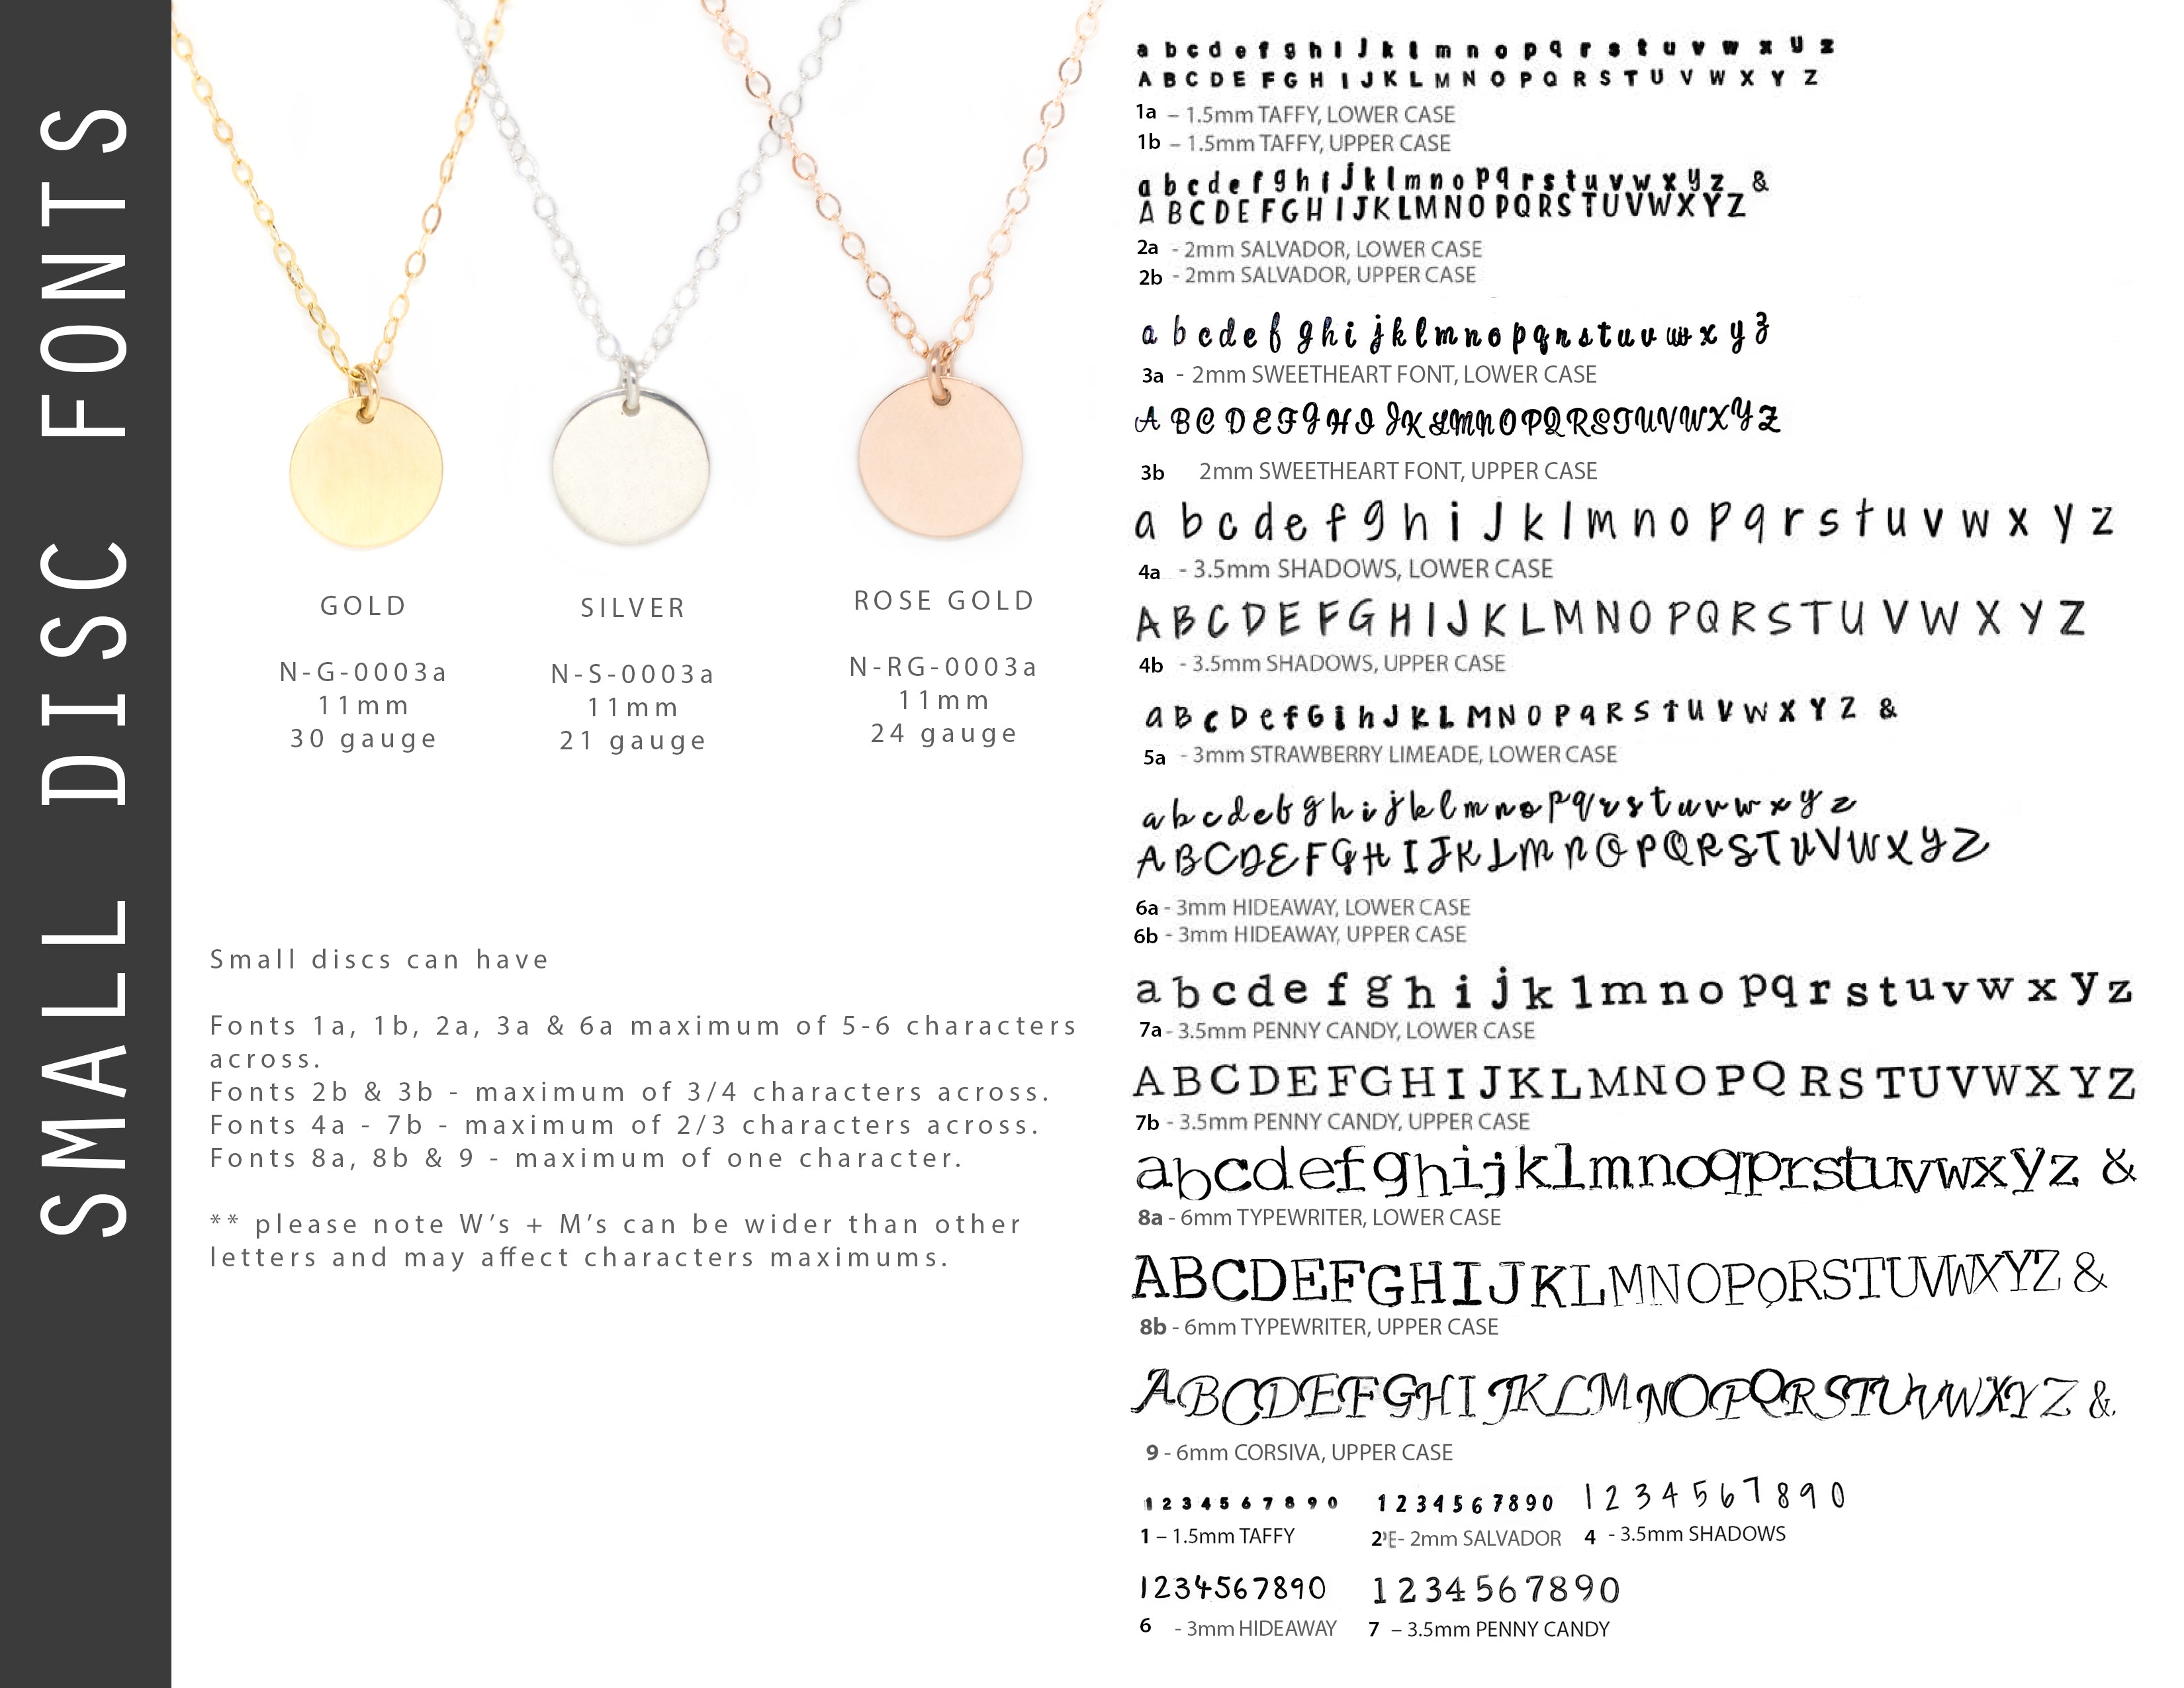 Ebb &amp; Flow Jewelry Small Disc Fonts